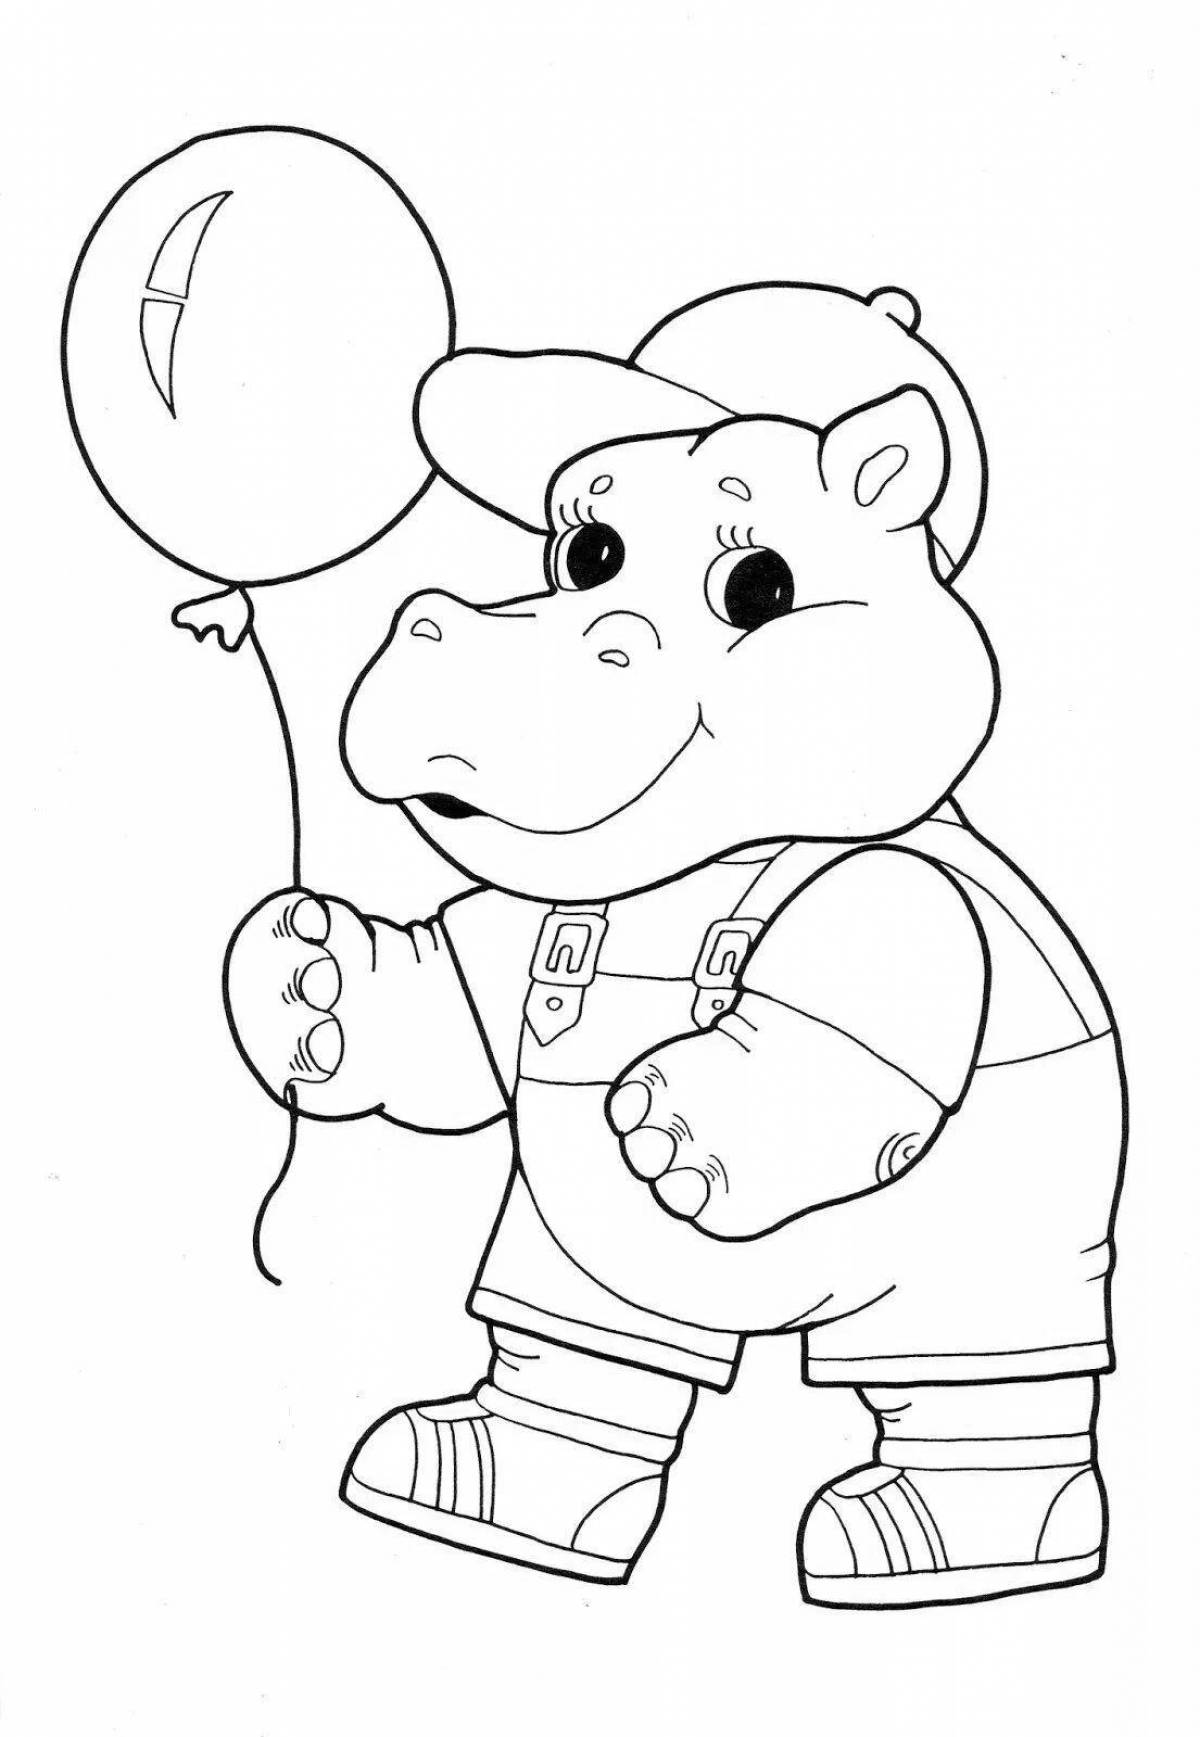 Wonderful hippo coloring for kids